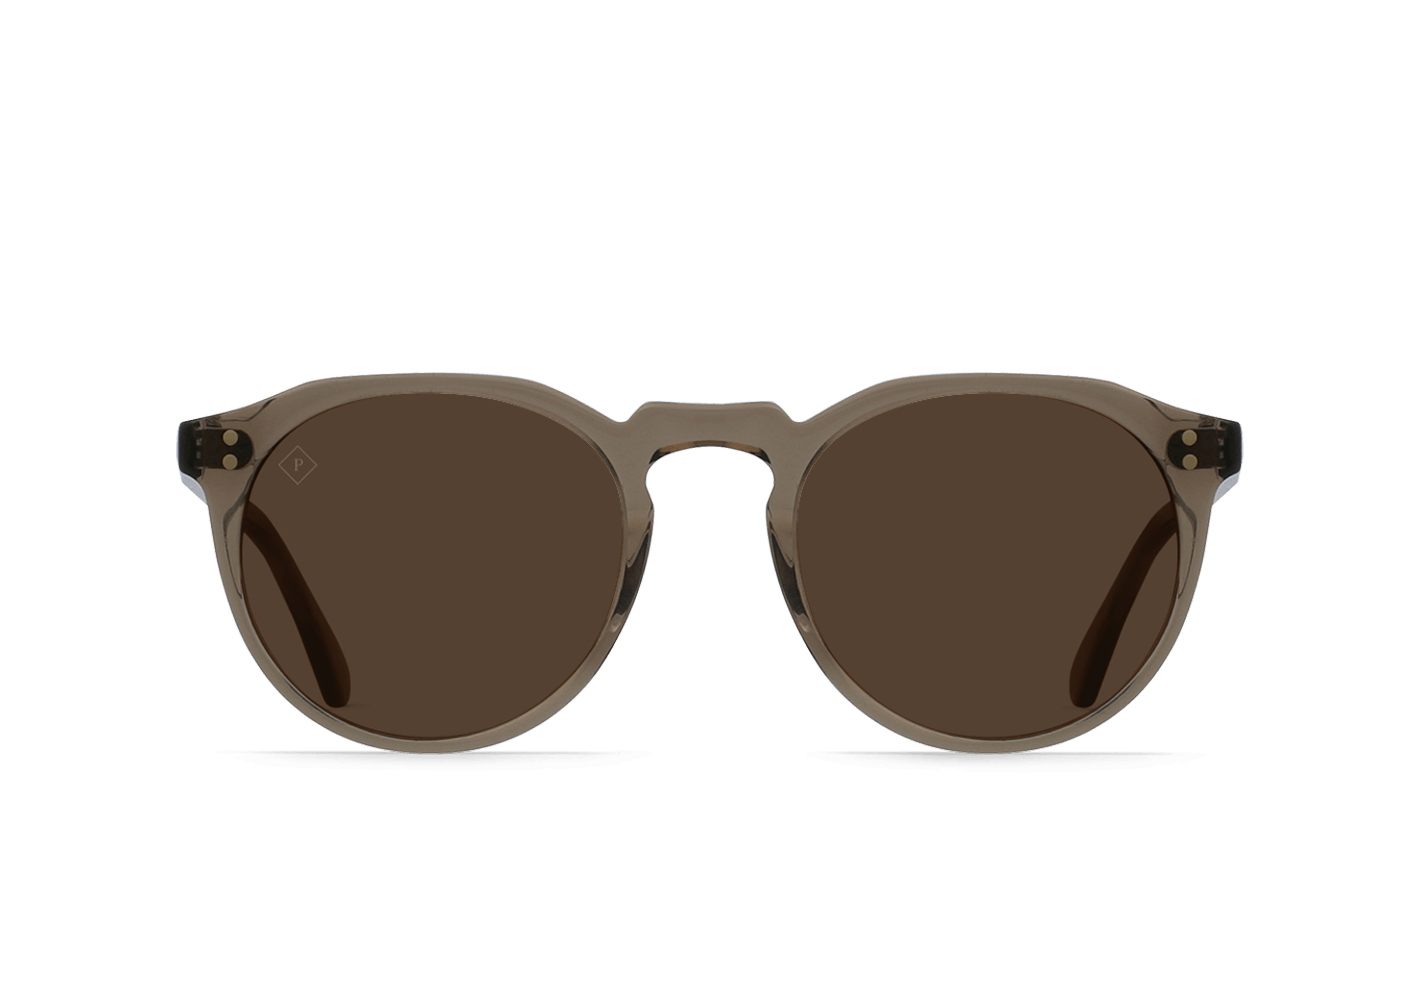 REMMY - GHOST / VIBRANT BROWN POLARIZED - Size 52